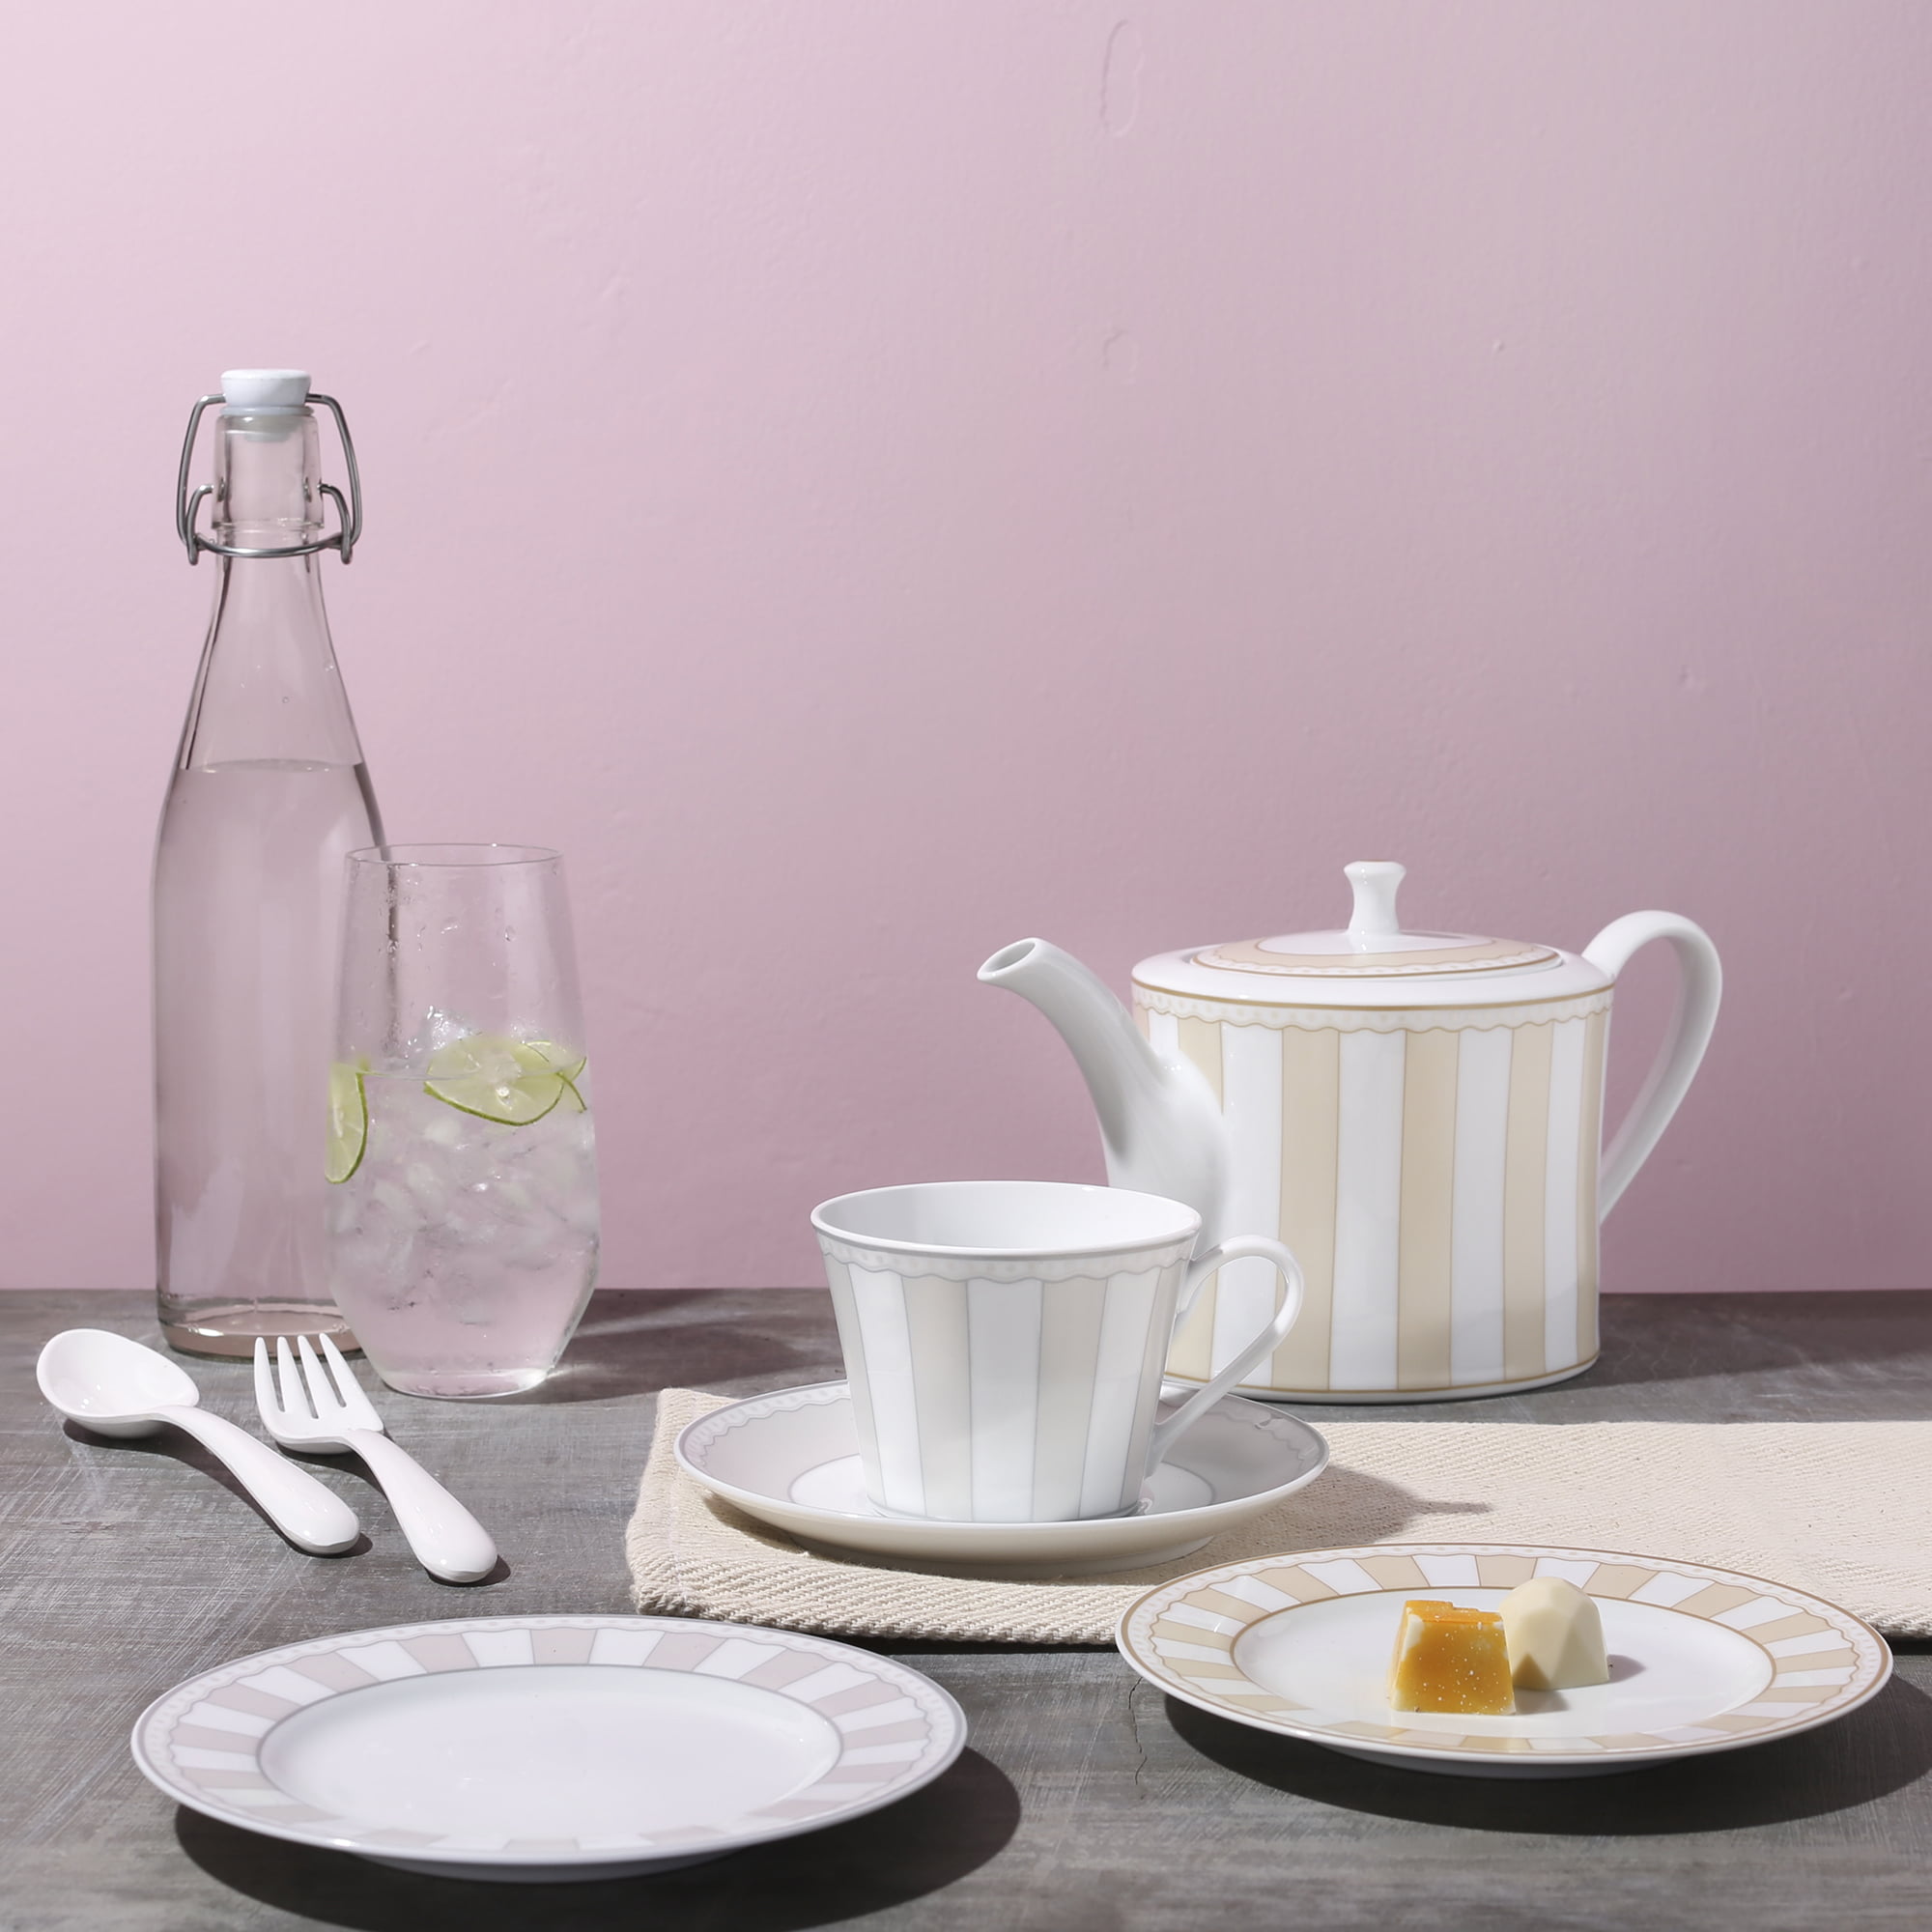 Why Porcelain Is The Best Dinnerware Material